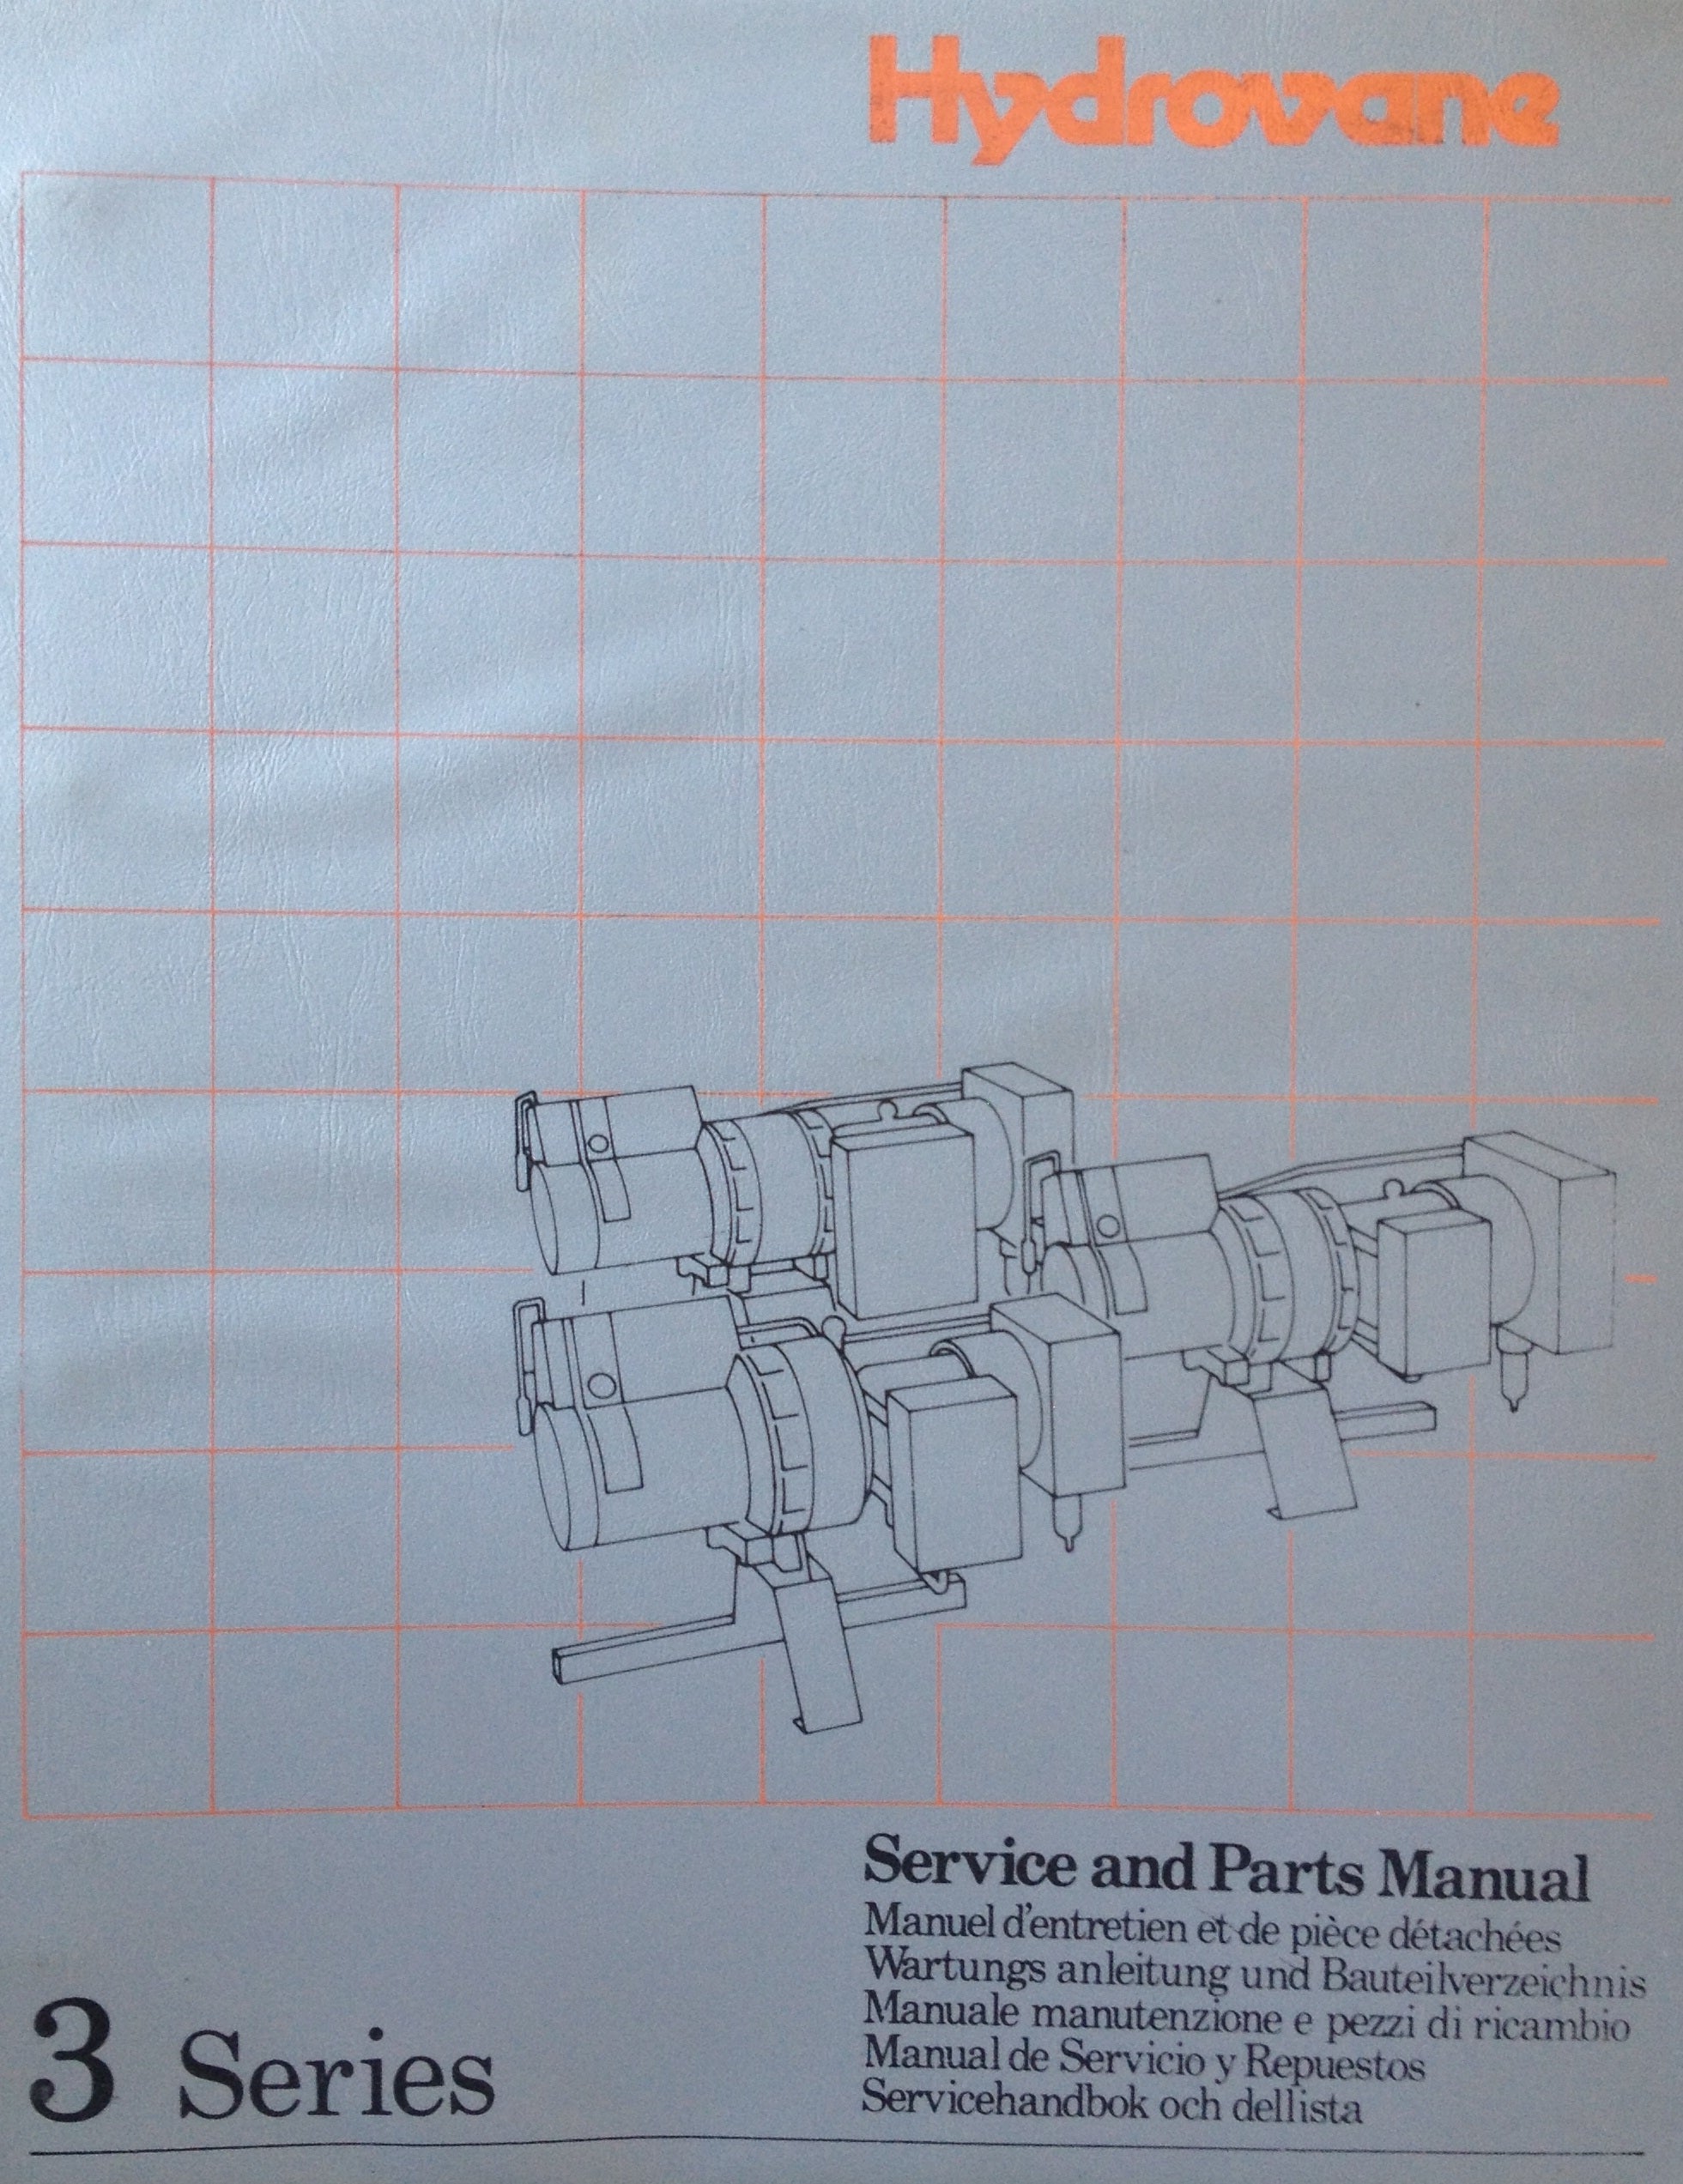 Hydrovane 23 33 & 43 Service Parts Manual 1987 Onwards Power Tool Equipment Manuals